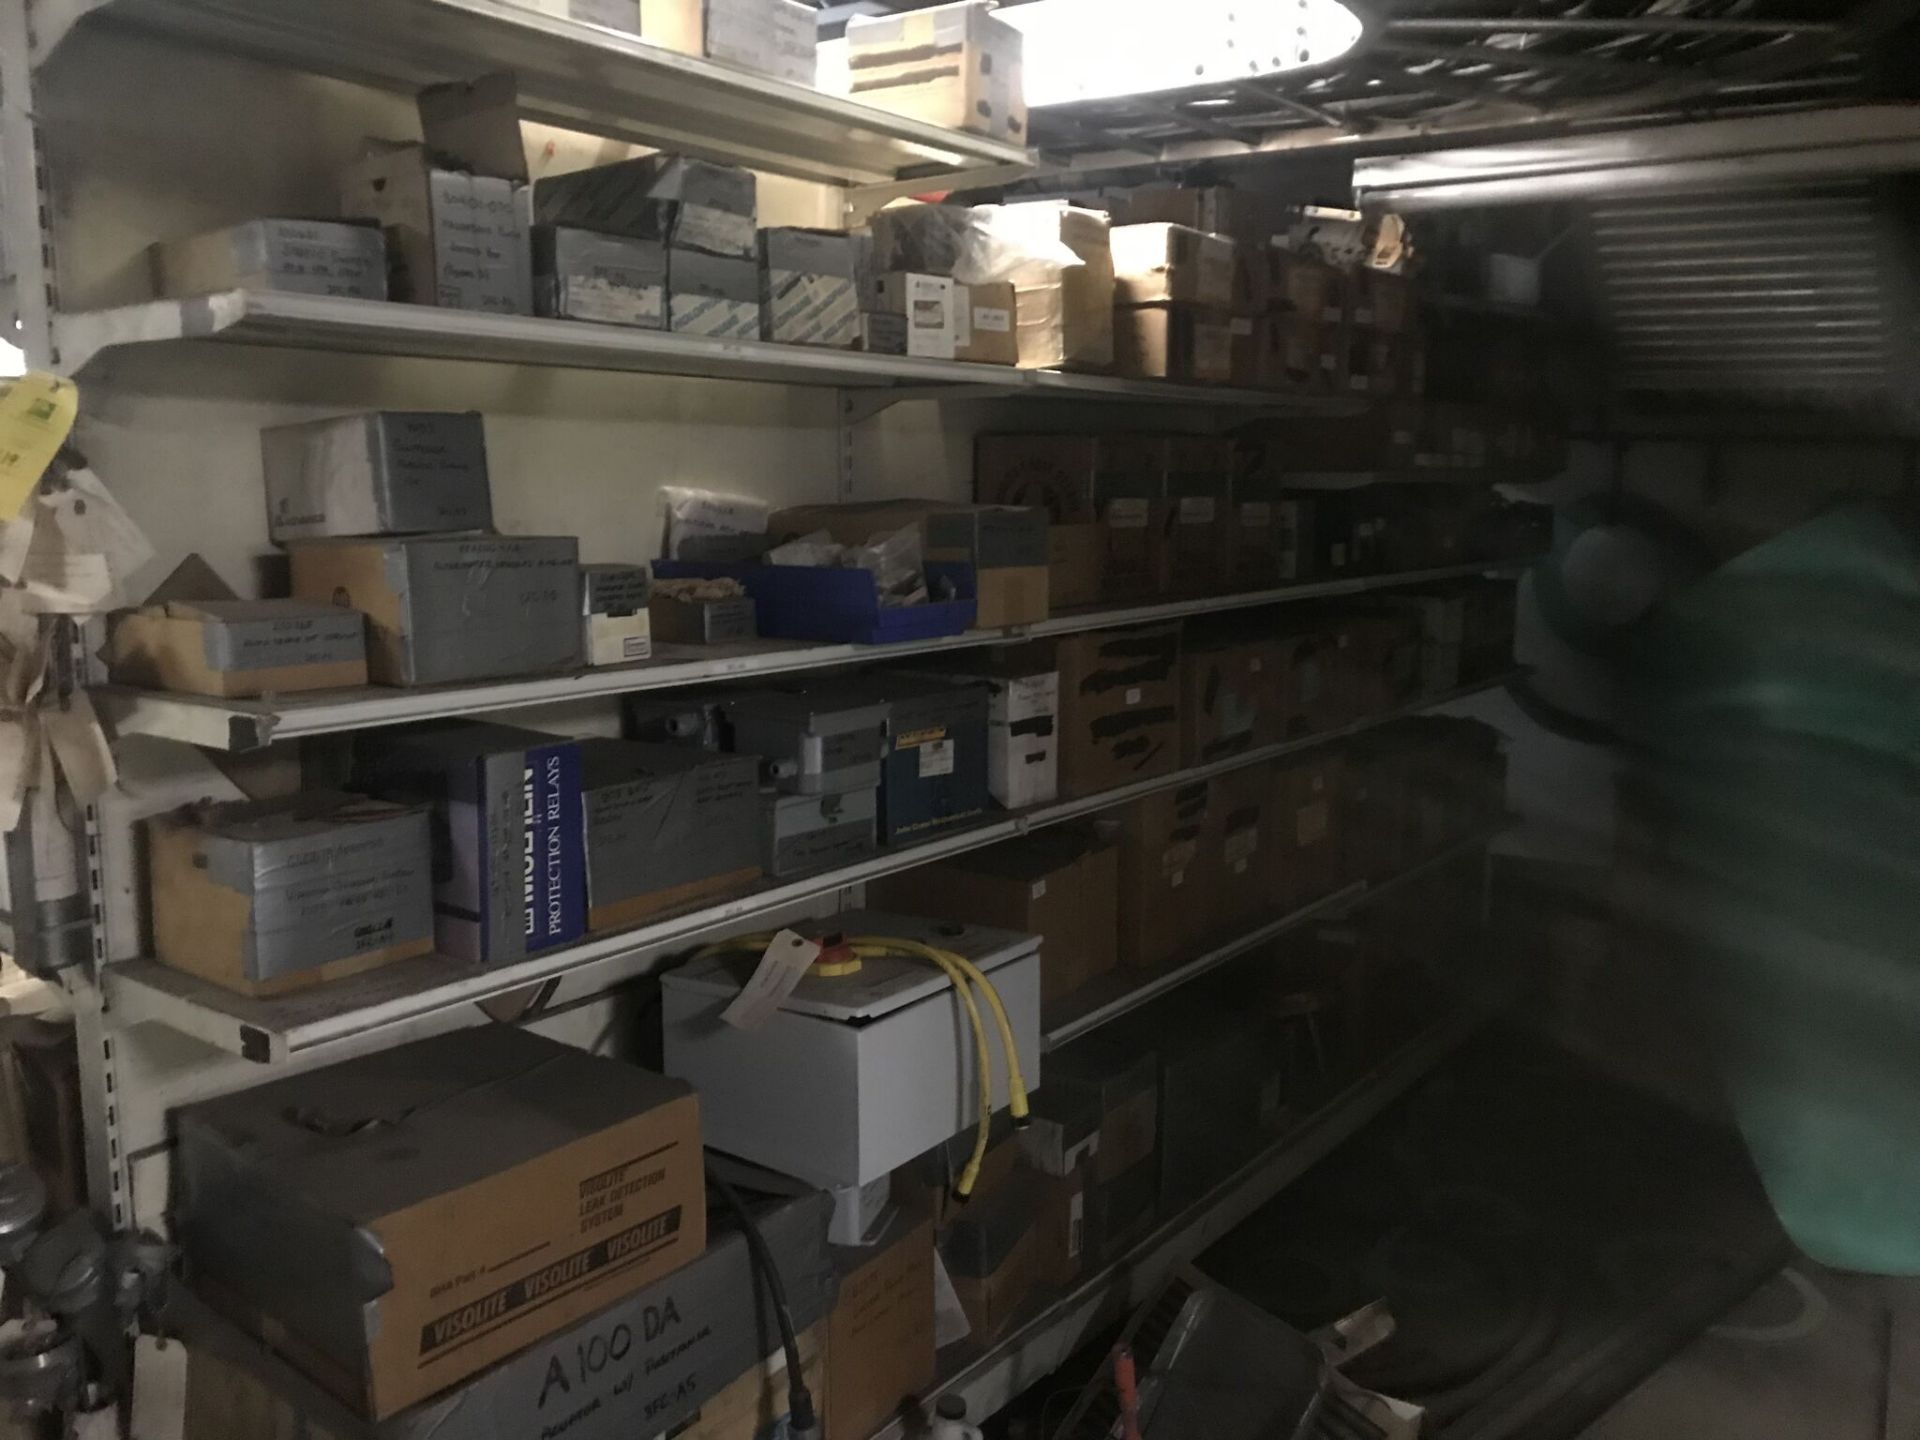 Shelving w/ Brakes, Motor Controllers, Electrical Components thermocouples, Thermoneters, Switches